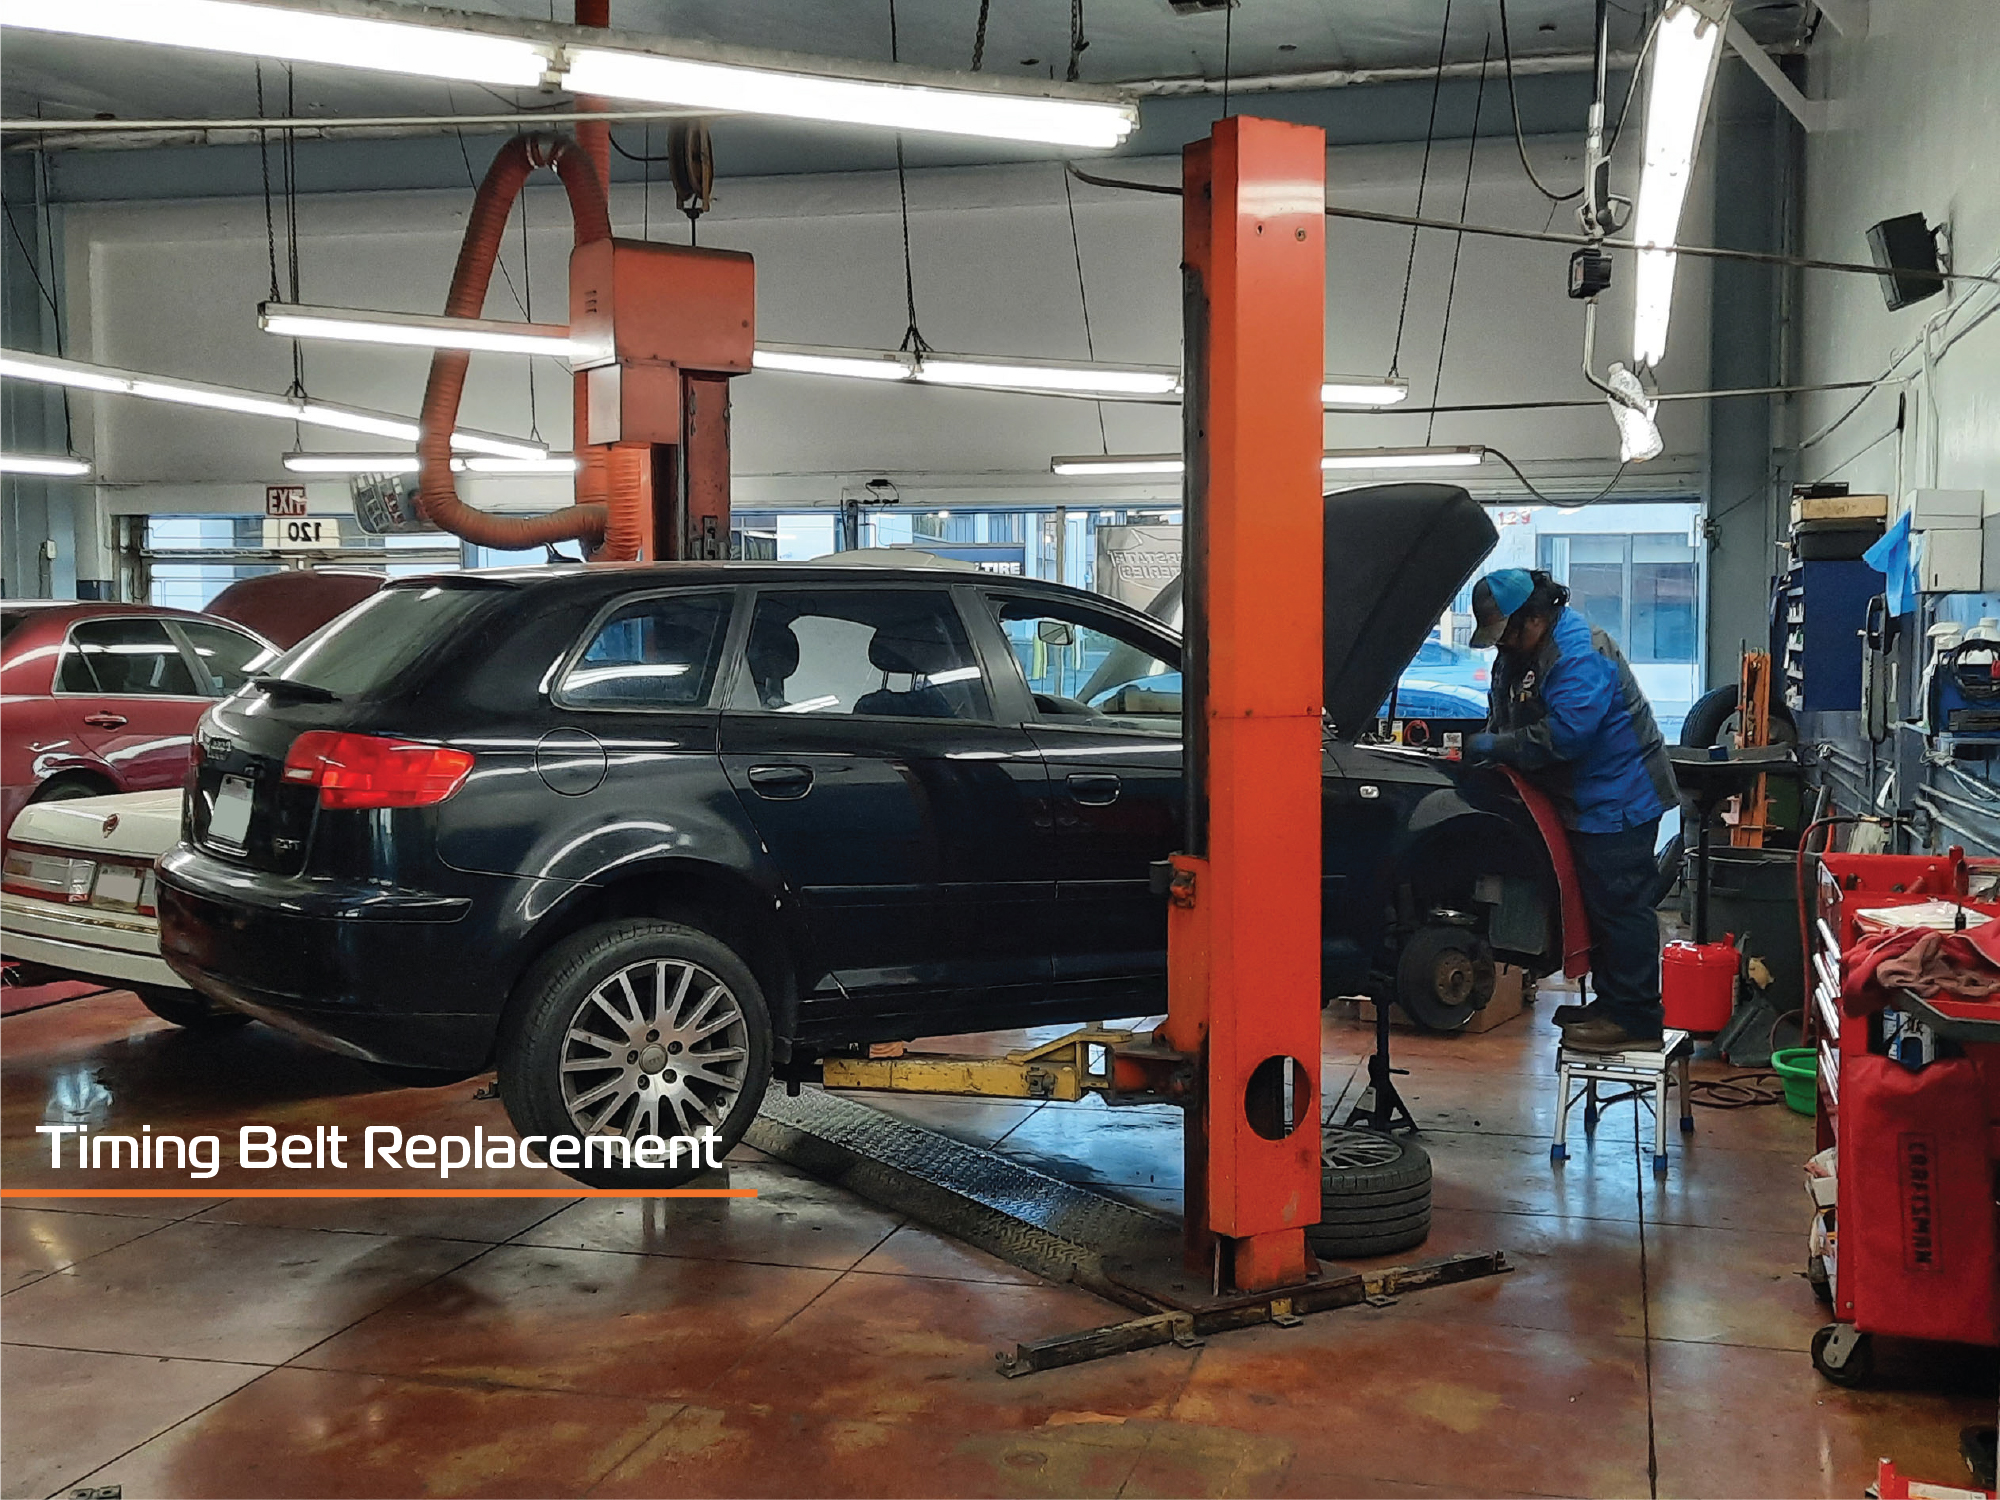 This mechanic is replacing the timing belt on a black Audi